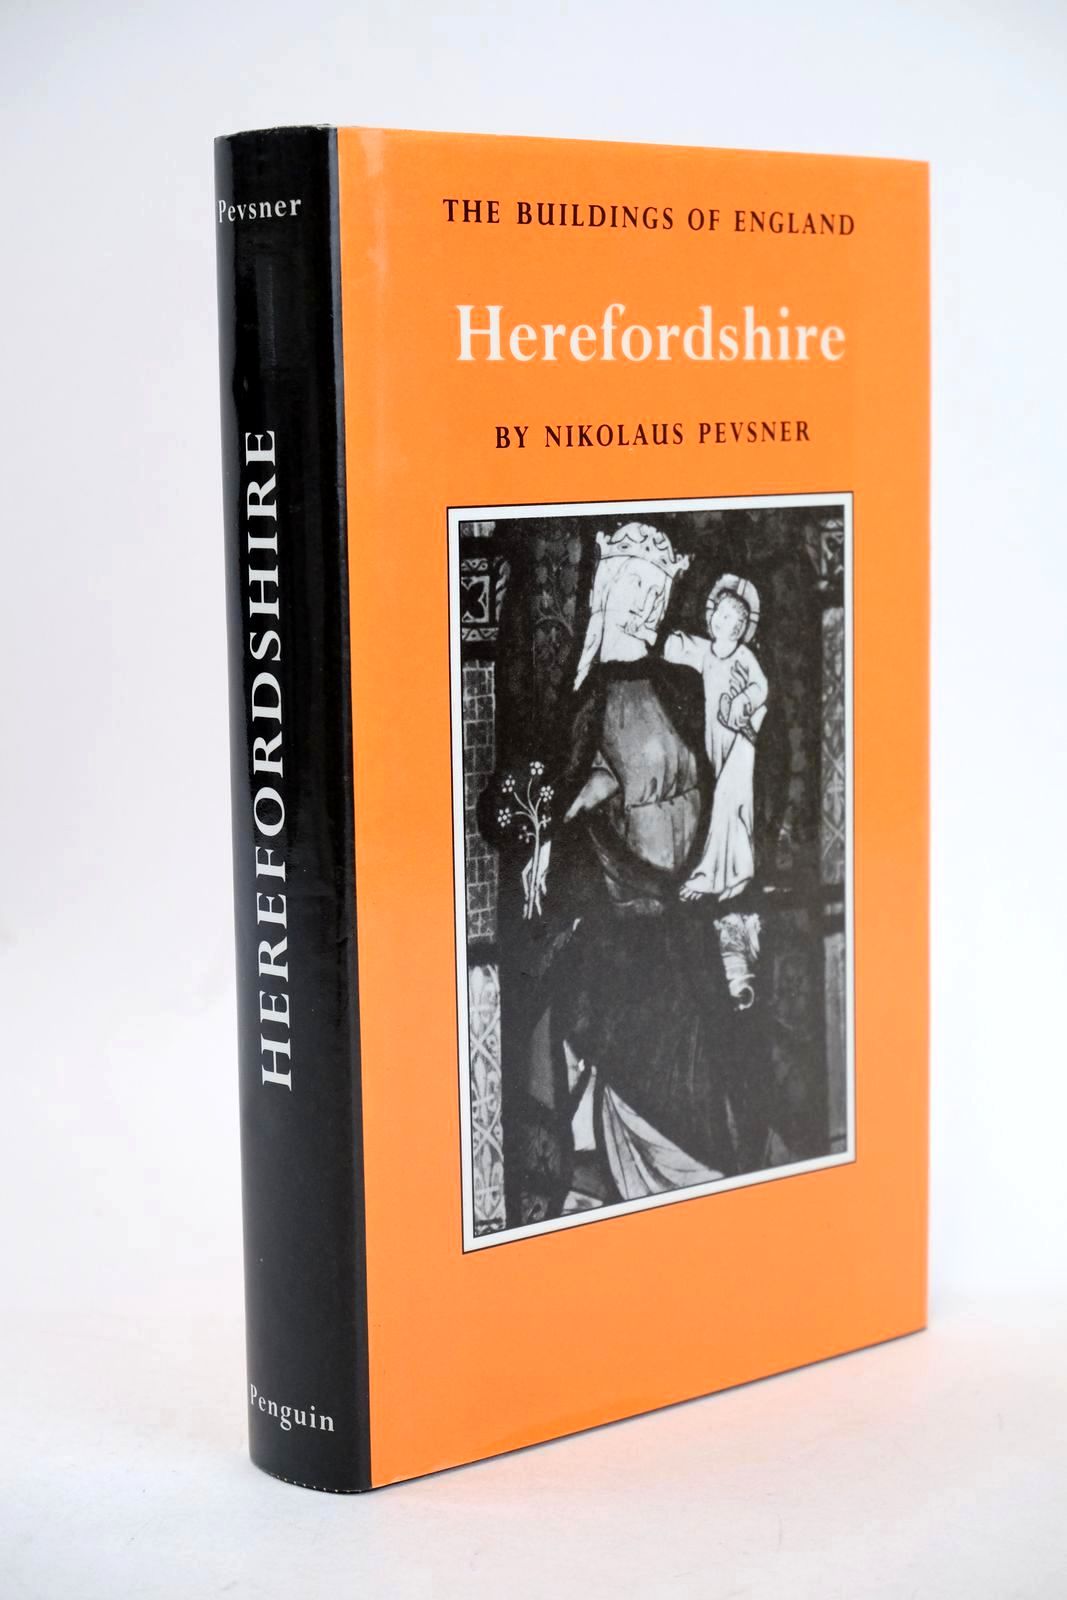 Photo of HEREFORDSHIRE (BUILDINGS OF ENGLAND) written by Pevsner, Nikolaus published by Penguin (STOCK CODE: 1326536)  for sale by Stella & Rose's Books